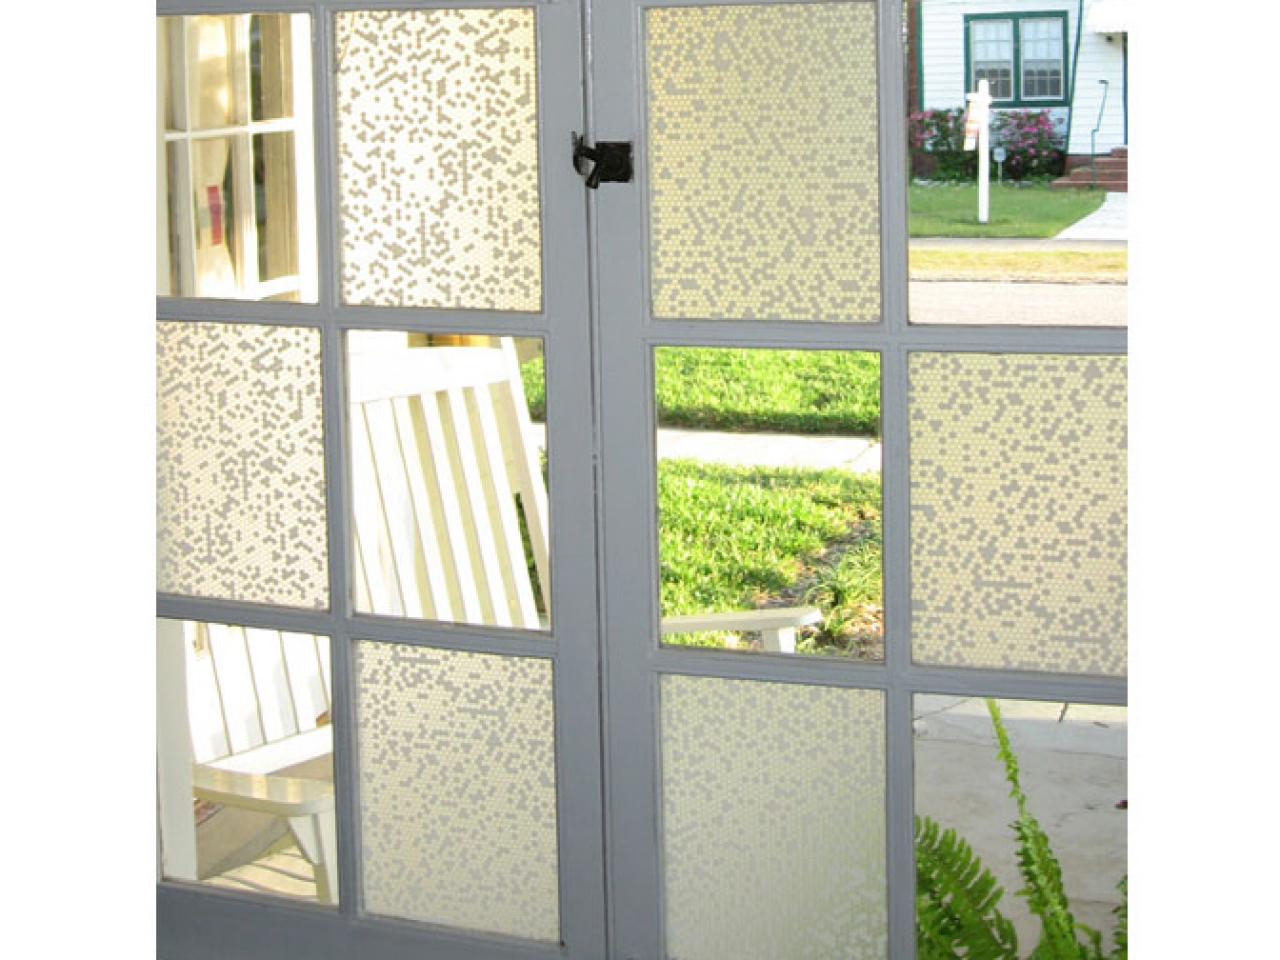 Window Film Can Make Your House More Beautiful And Save Money Diy,Ant Anstead Christina Tarek El Moussa